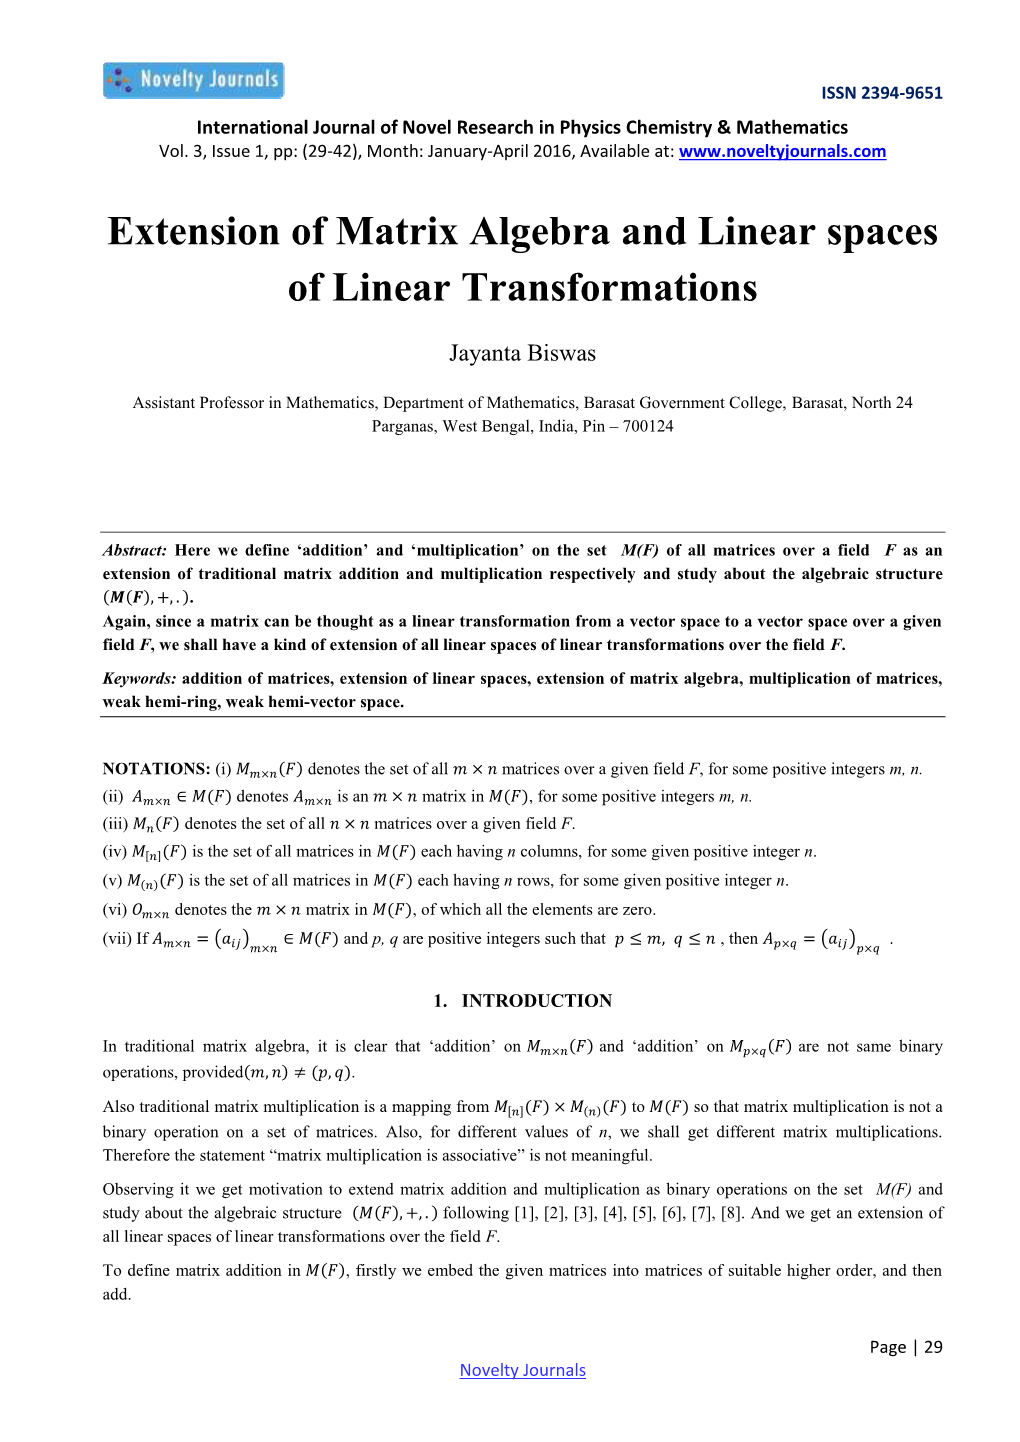 Extension of Matrix Algebra and Linear Spaces of Linear Transformations